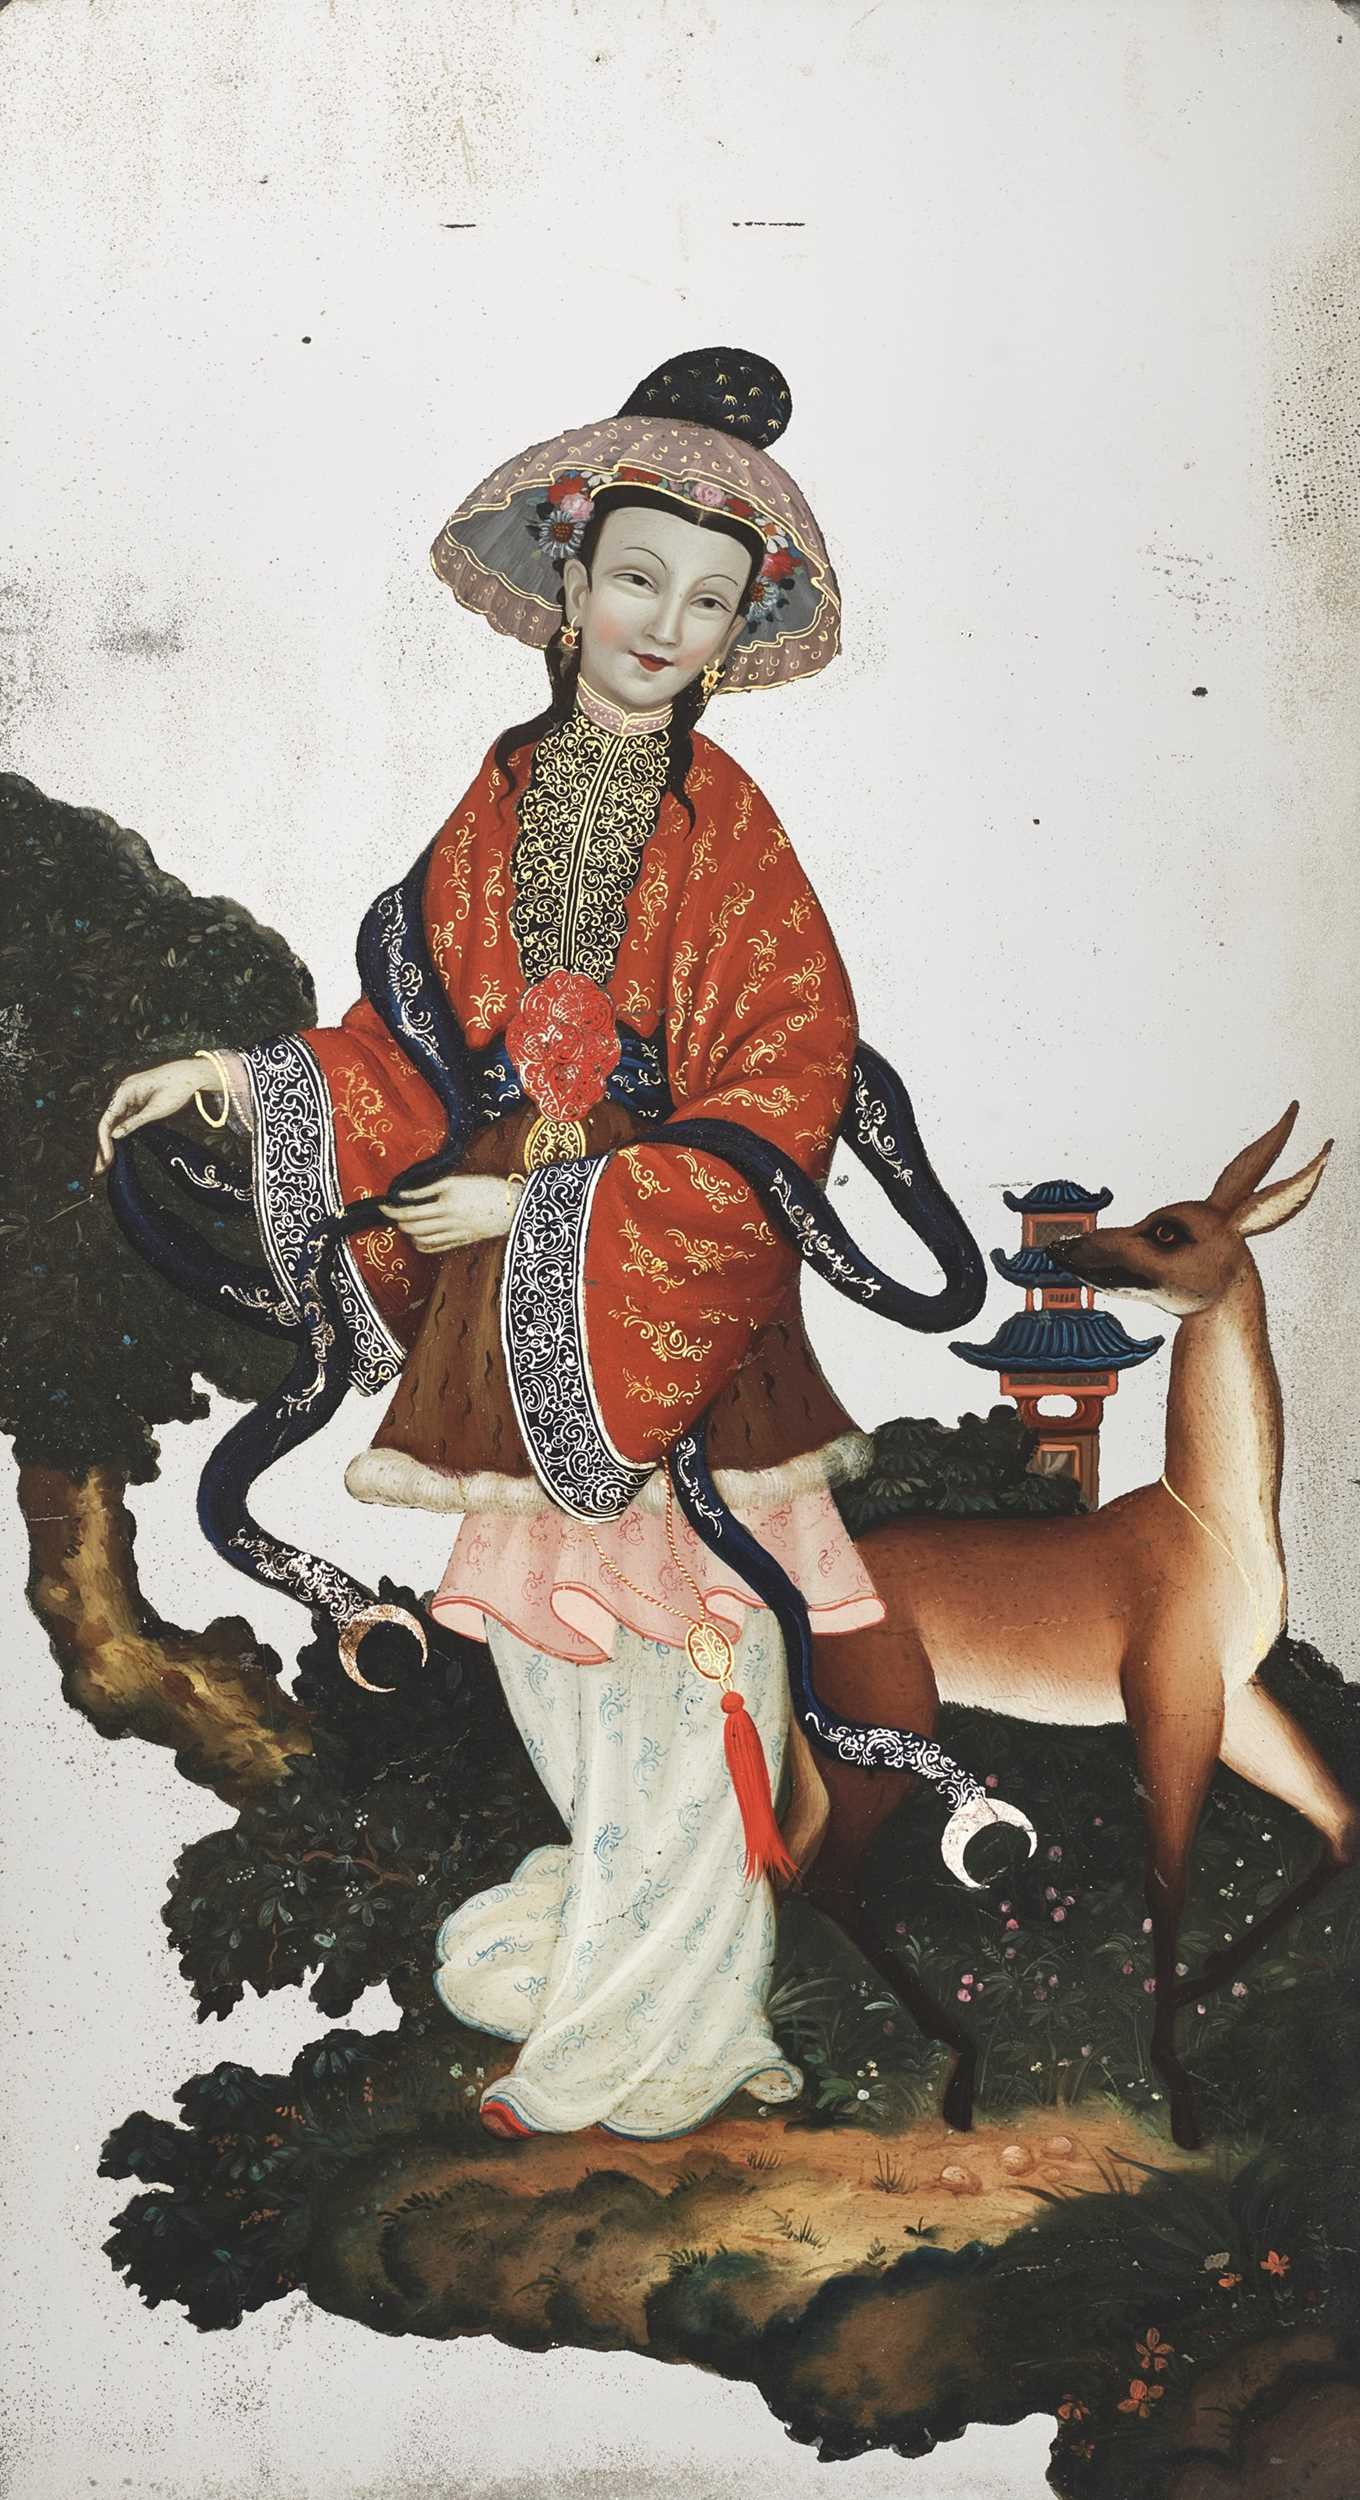 Lot 203 - A REVERSE-GLASS MIRROR PAINTING OF A NOBLE LADY WITH DEER, CANTON SCHOOL, QING DYNASTY